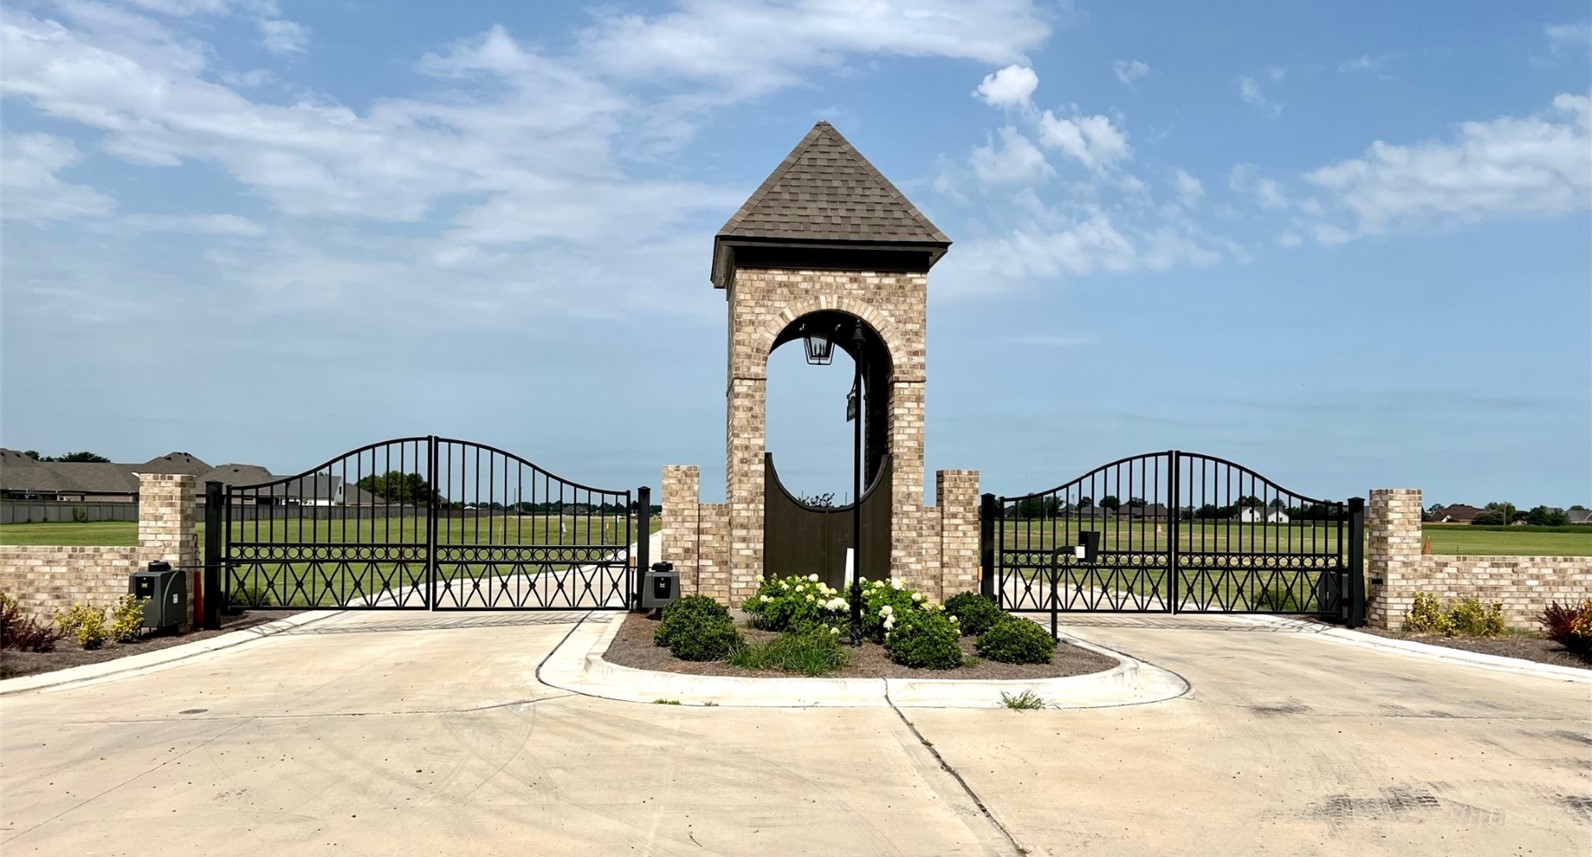 Lot 3 in Bolivar County in Chatmoss Subdivisions in Cleveland, MS